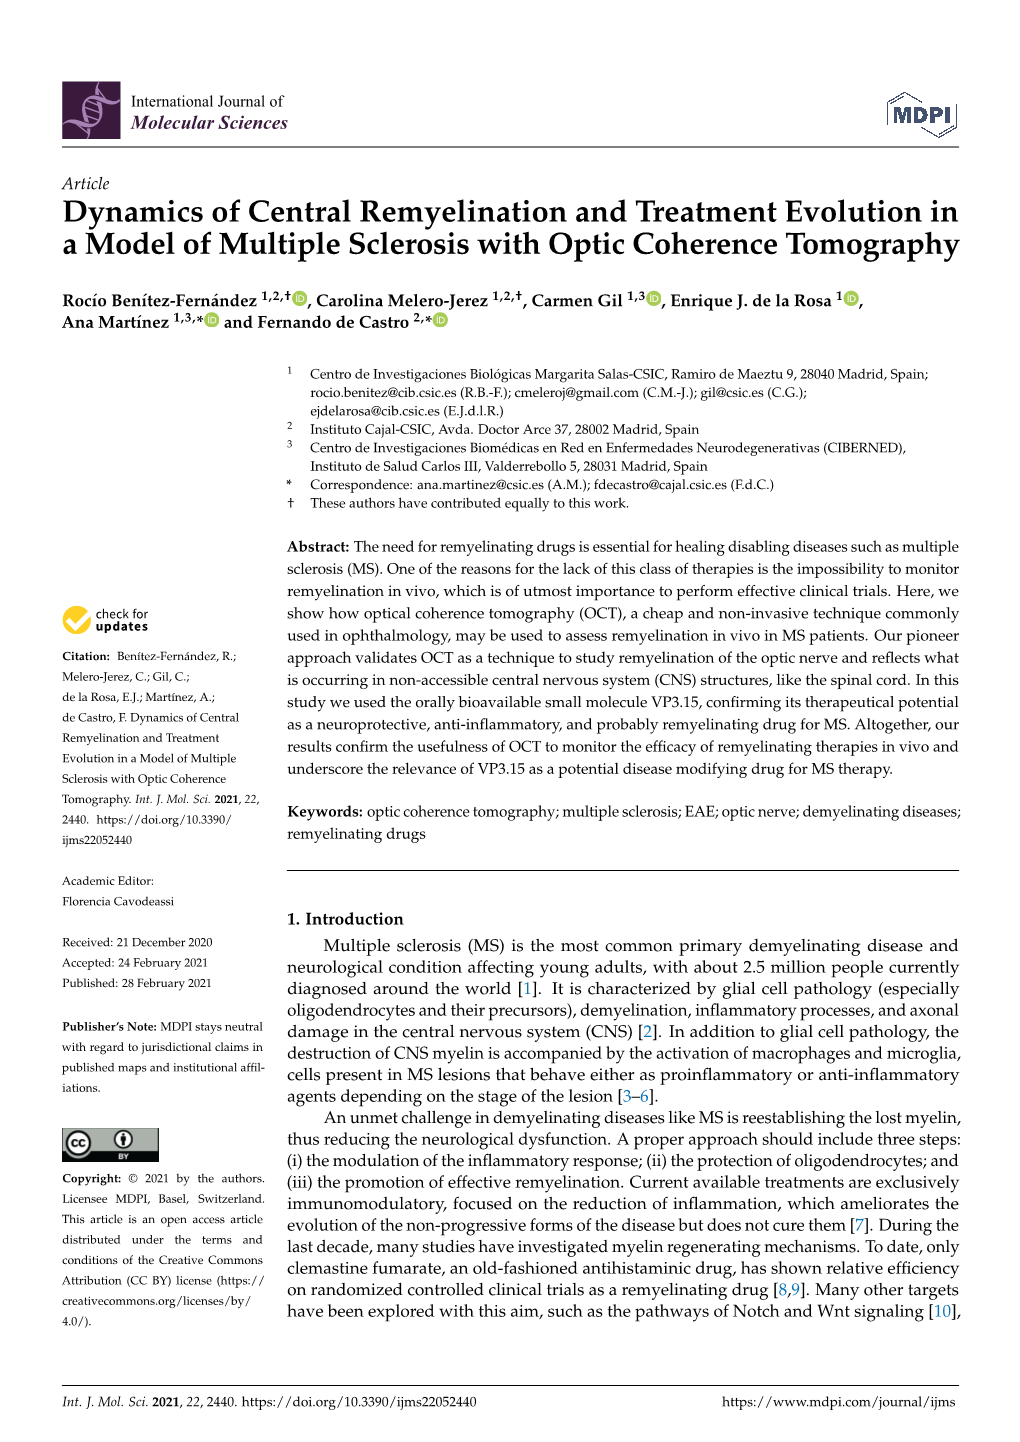 Dynamics of Central Remyelination and Treatment Evolution in a Model of Multiple Sclerosis with Optic Coherence Tomography